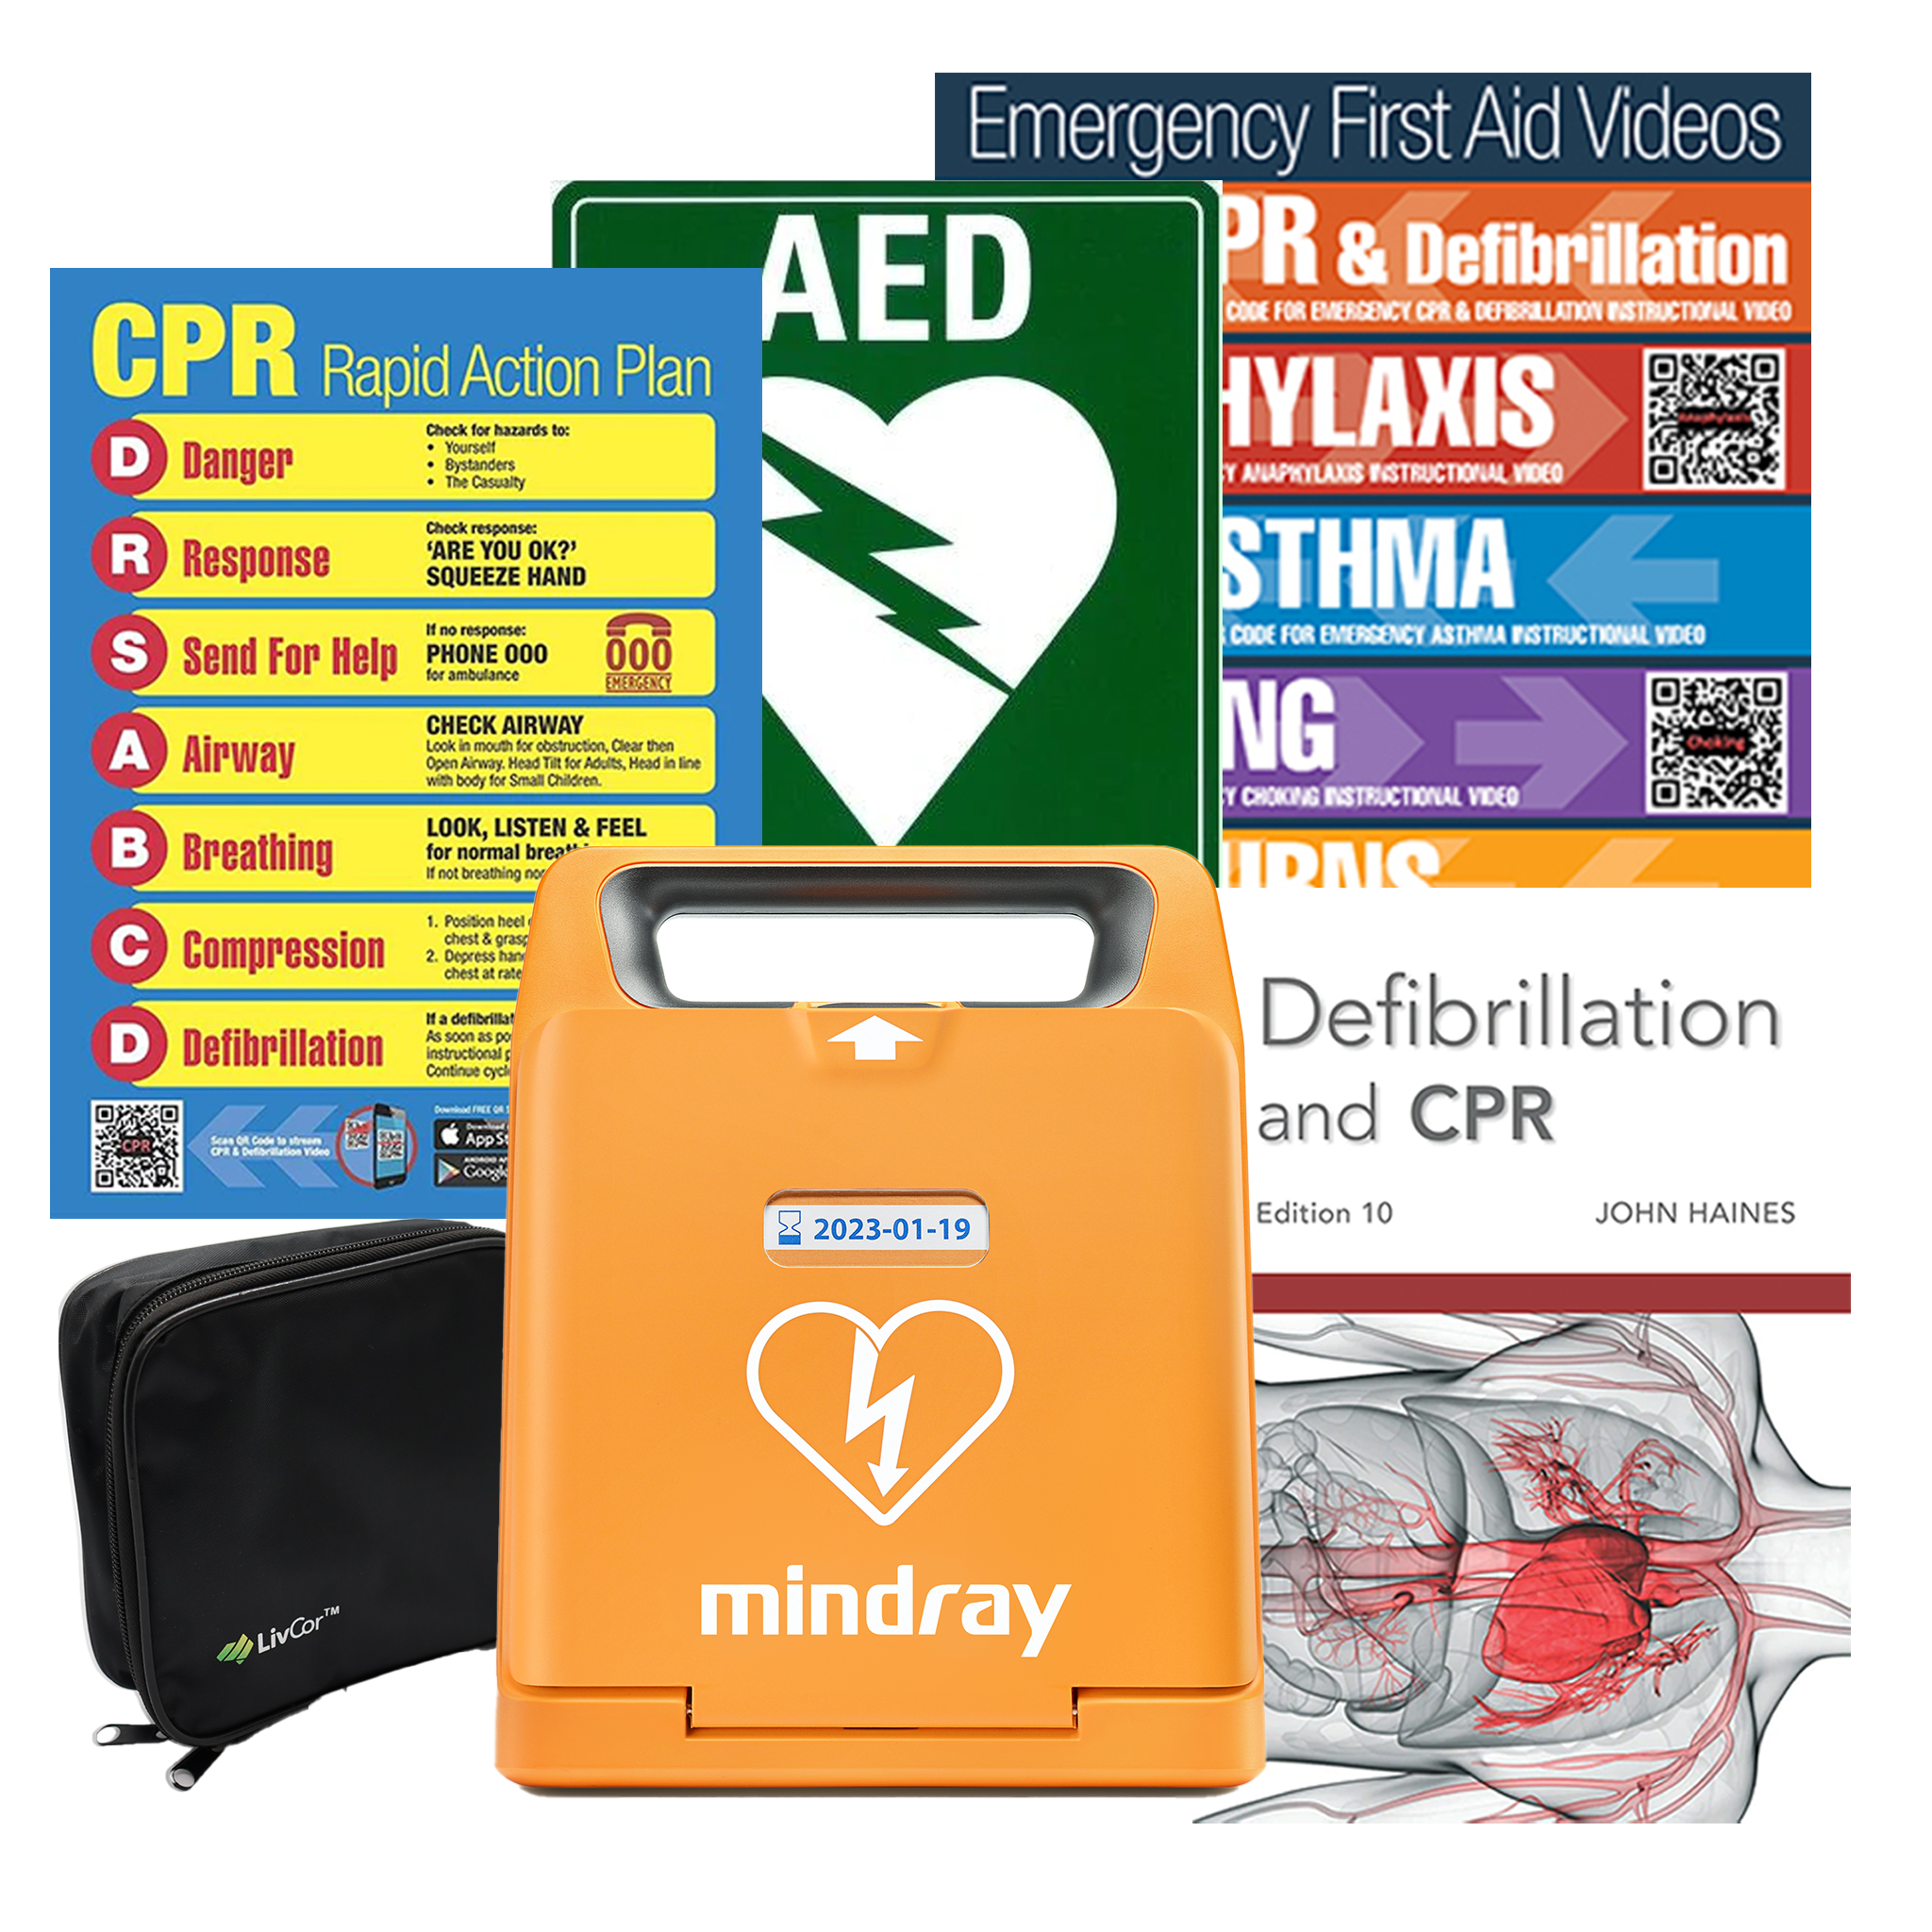 Mindray BeneHeart C1A Fully Auto Defibrillator Package | No Wall Cabinet